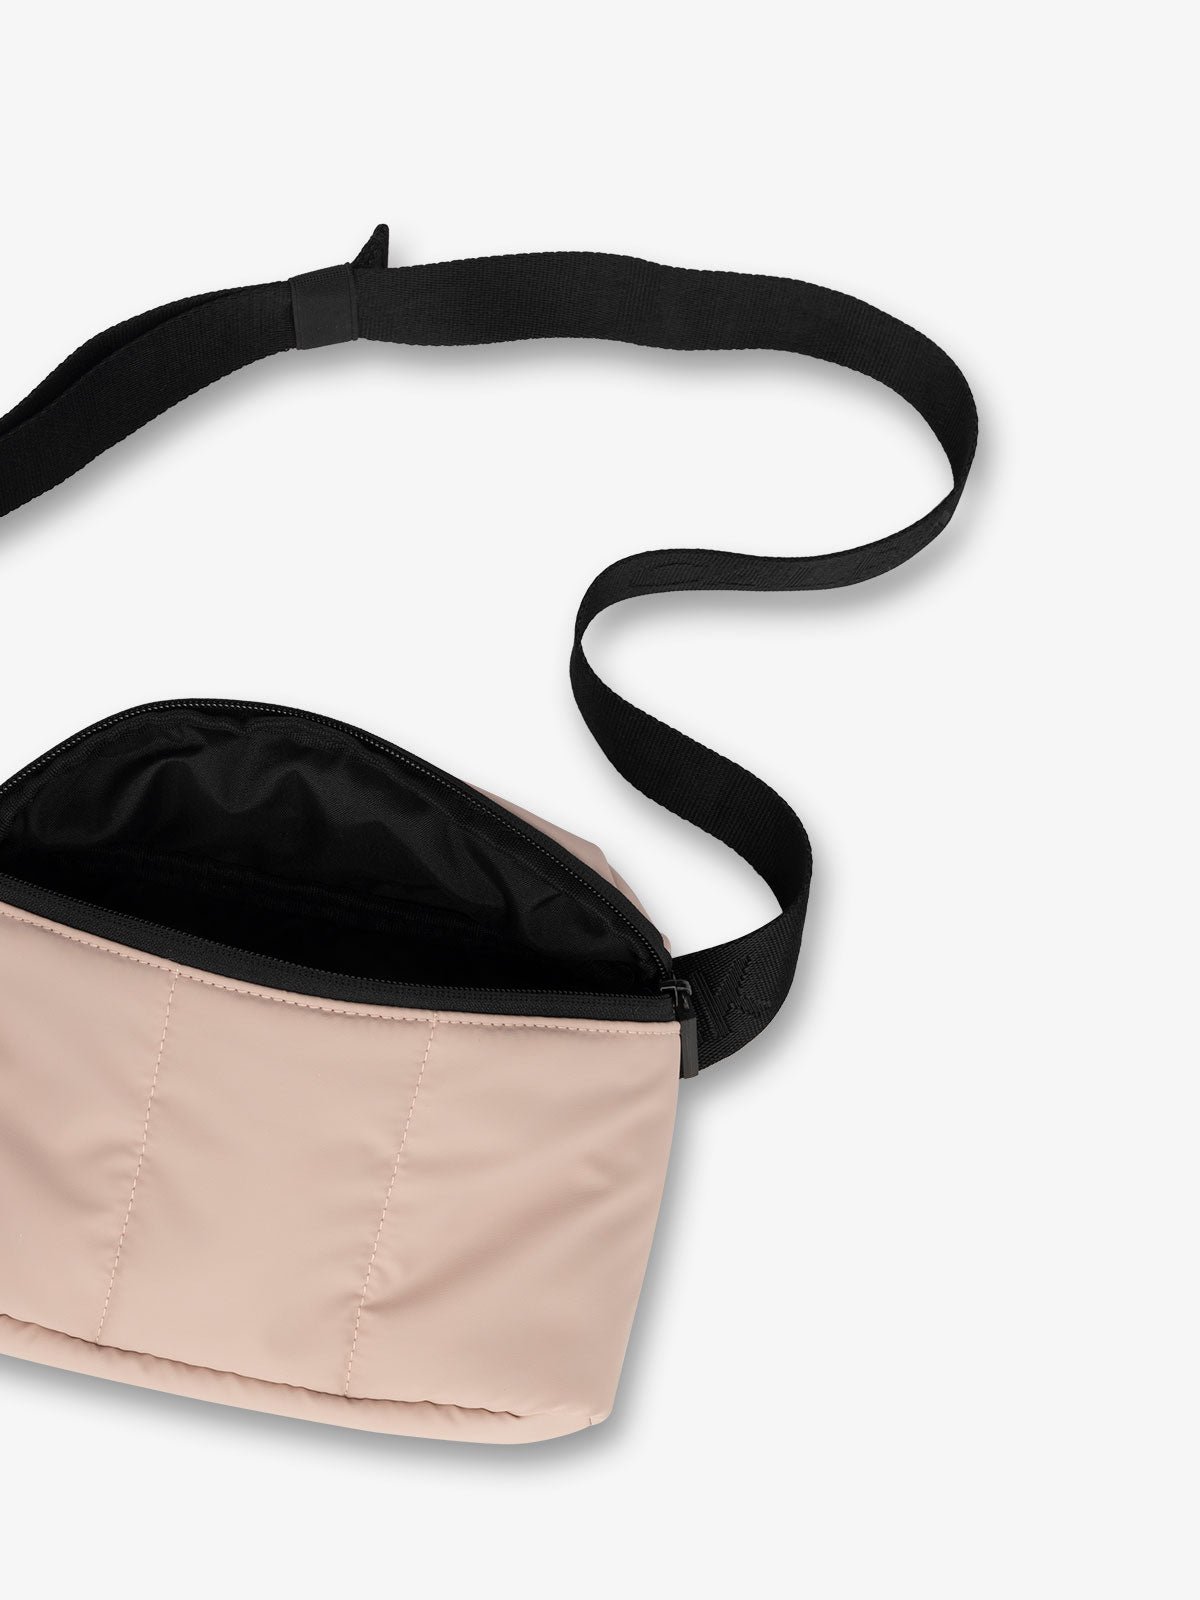 CALPAK Luka mini crossbody fanny pack with soft water-resistant exterior and adjustable strap in rose quartz